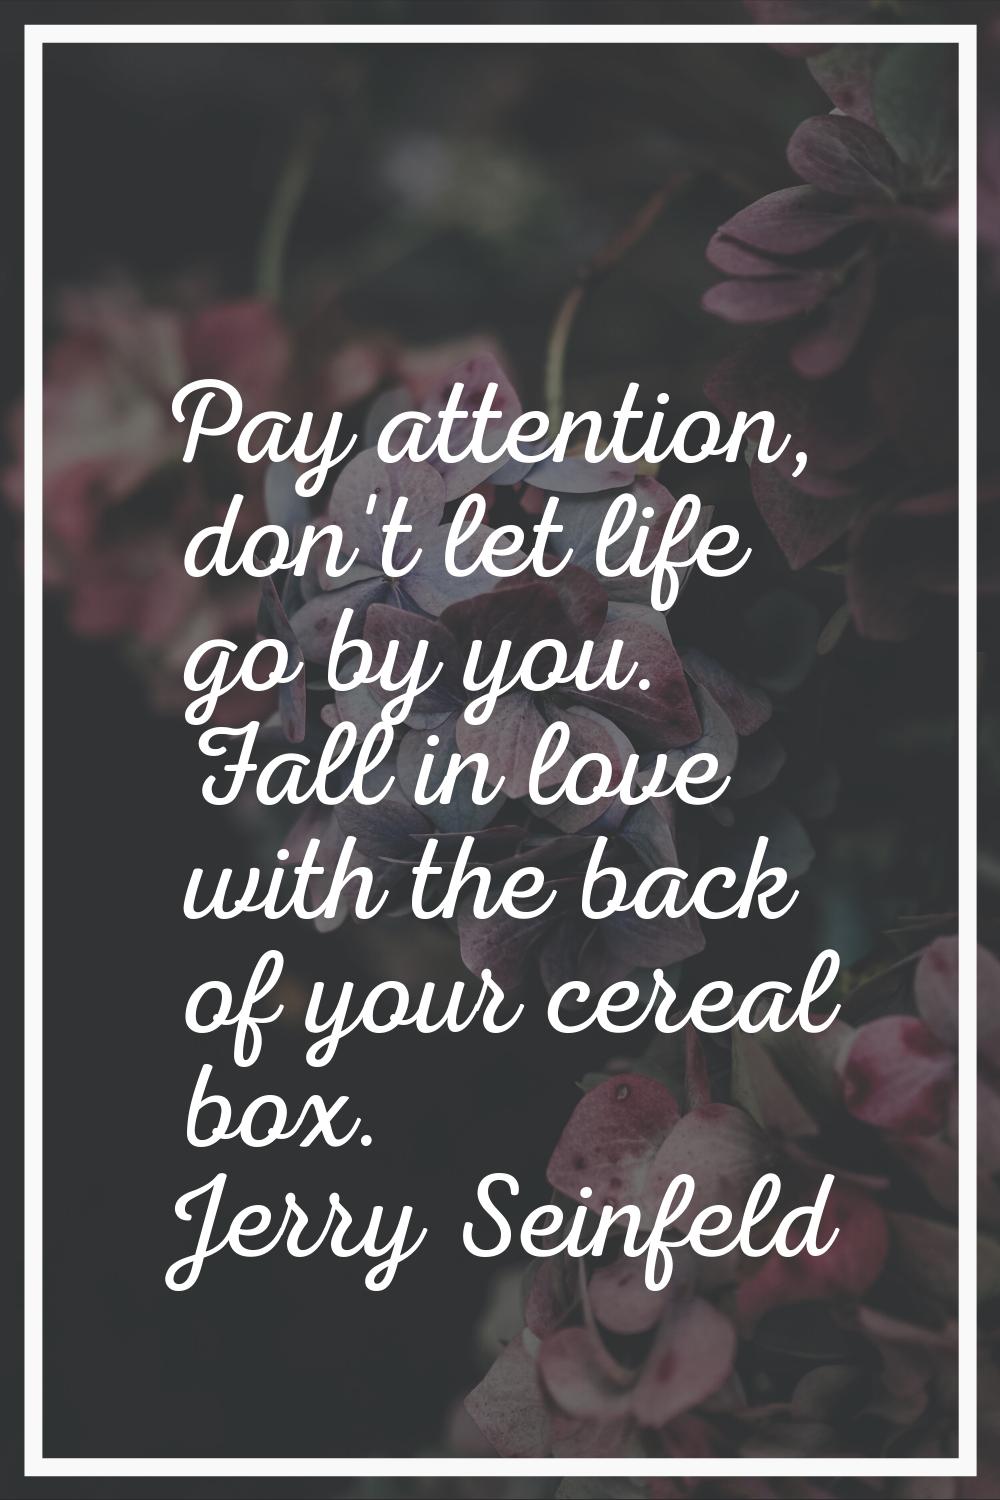 Pay attention, don't let life go by you. Fall in love with the back of your cereal box.